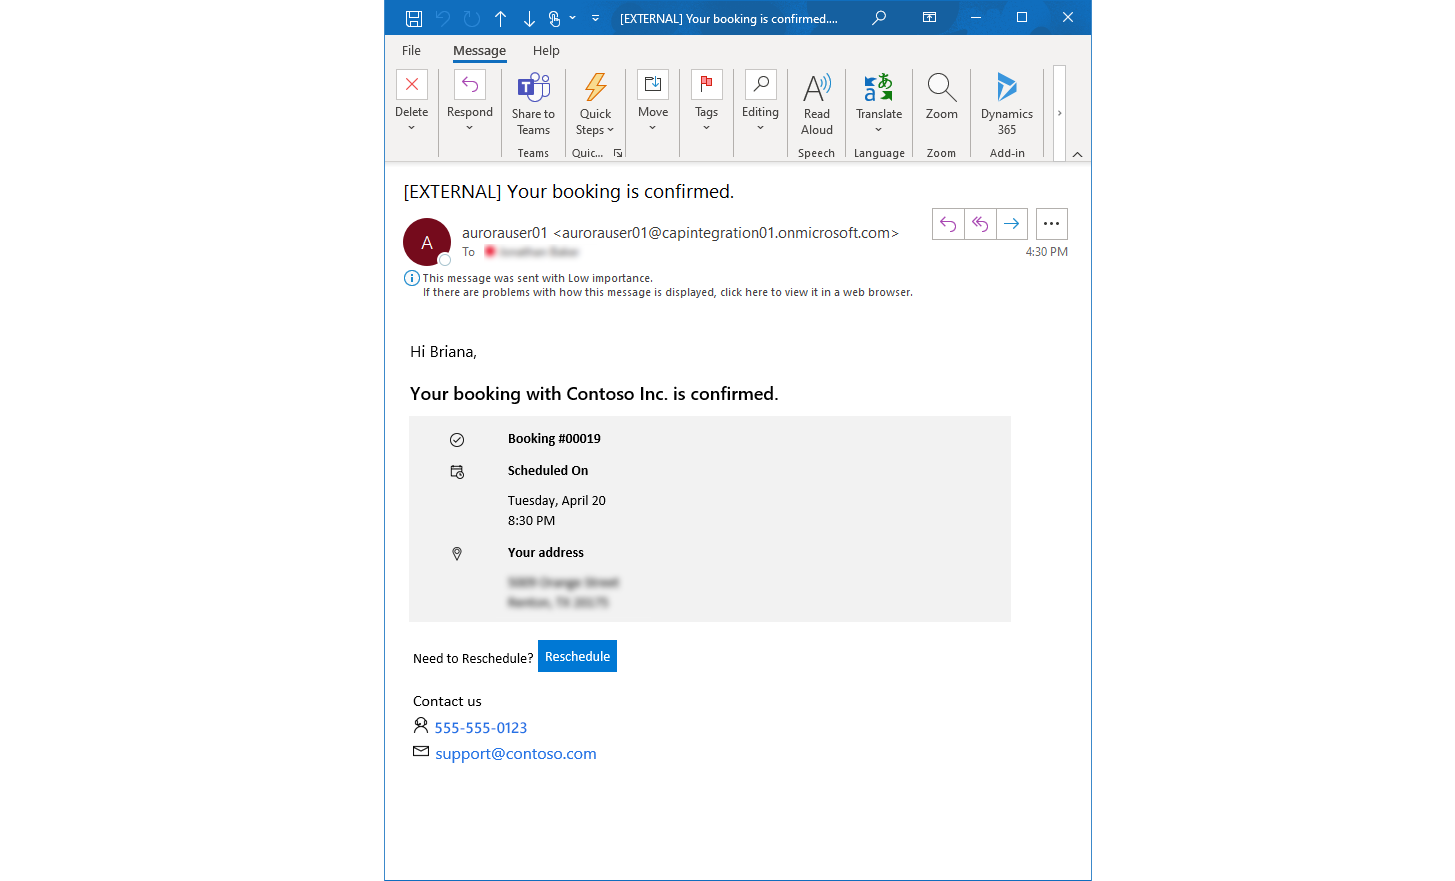 Email showing the customer that their booking in confirmed.